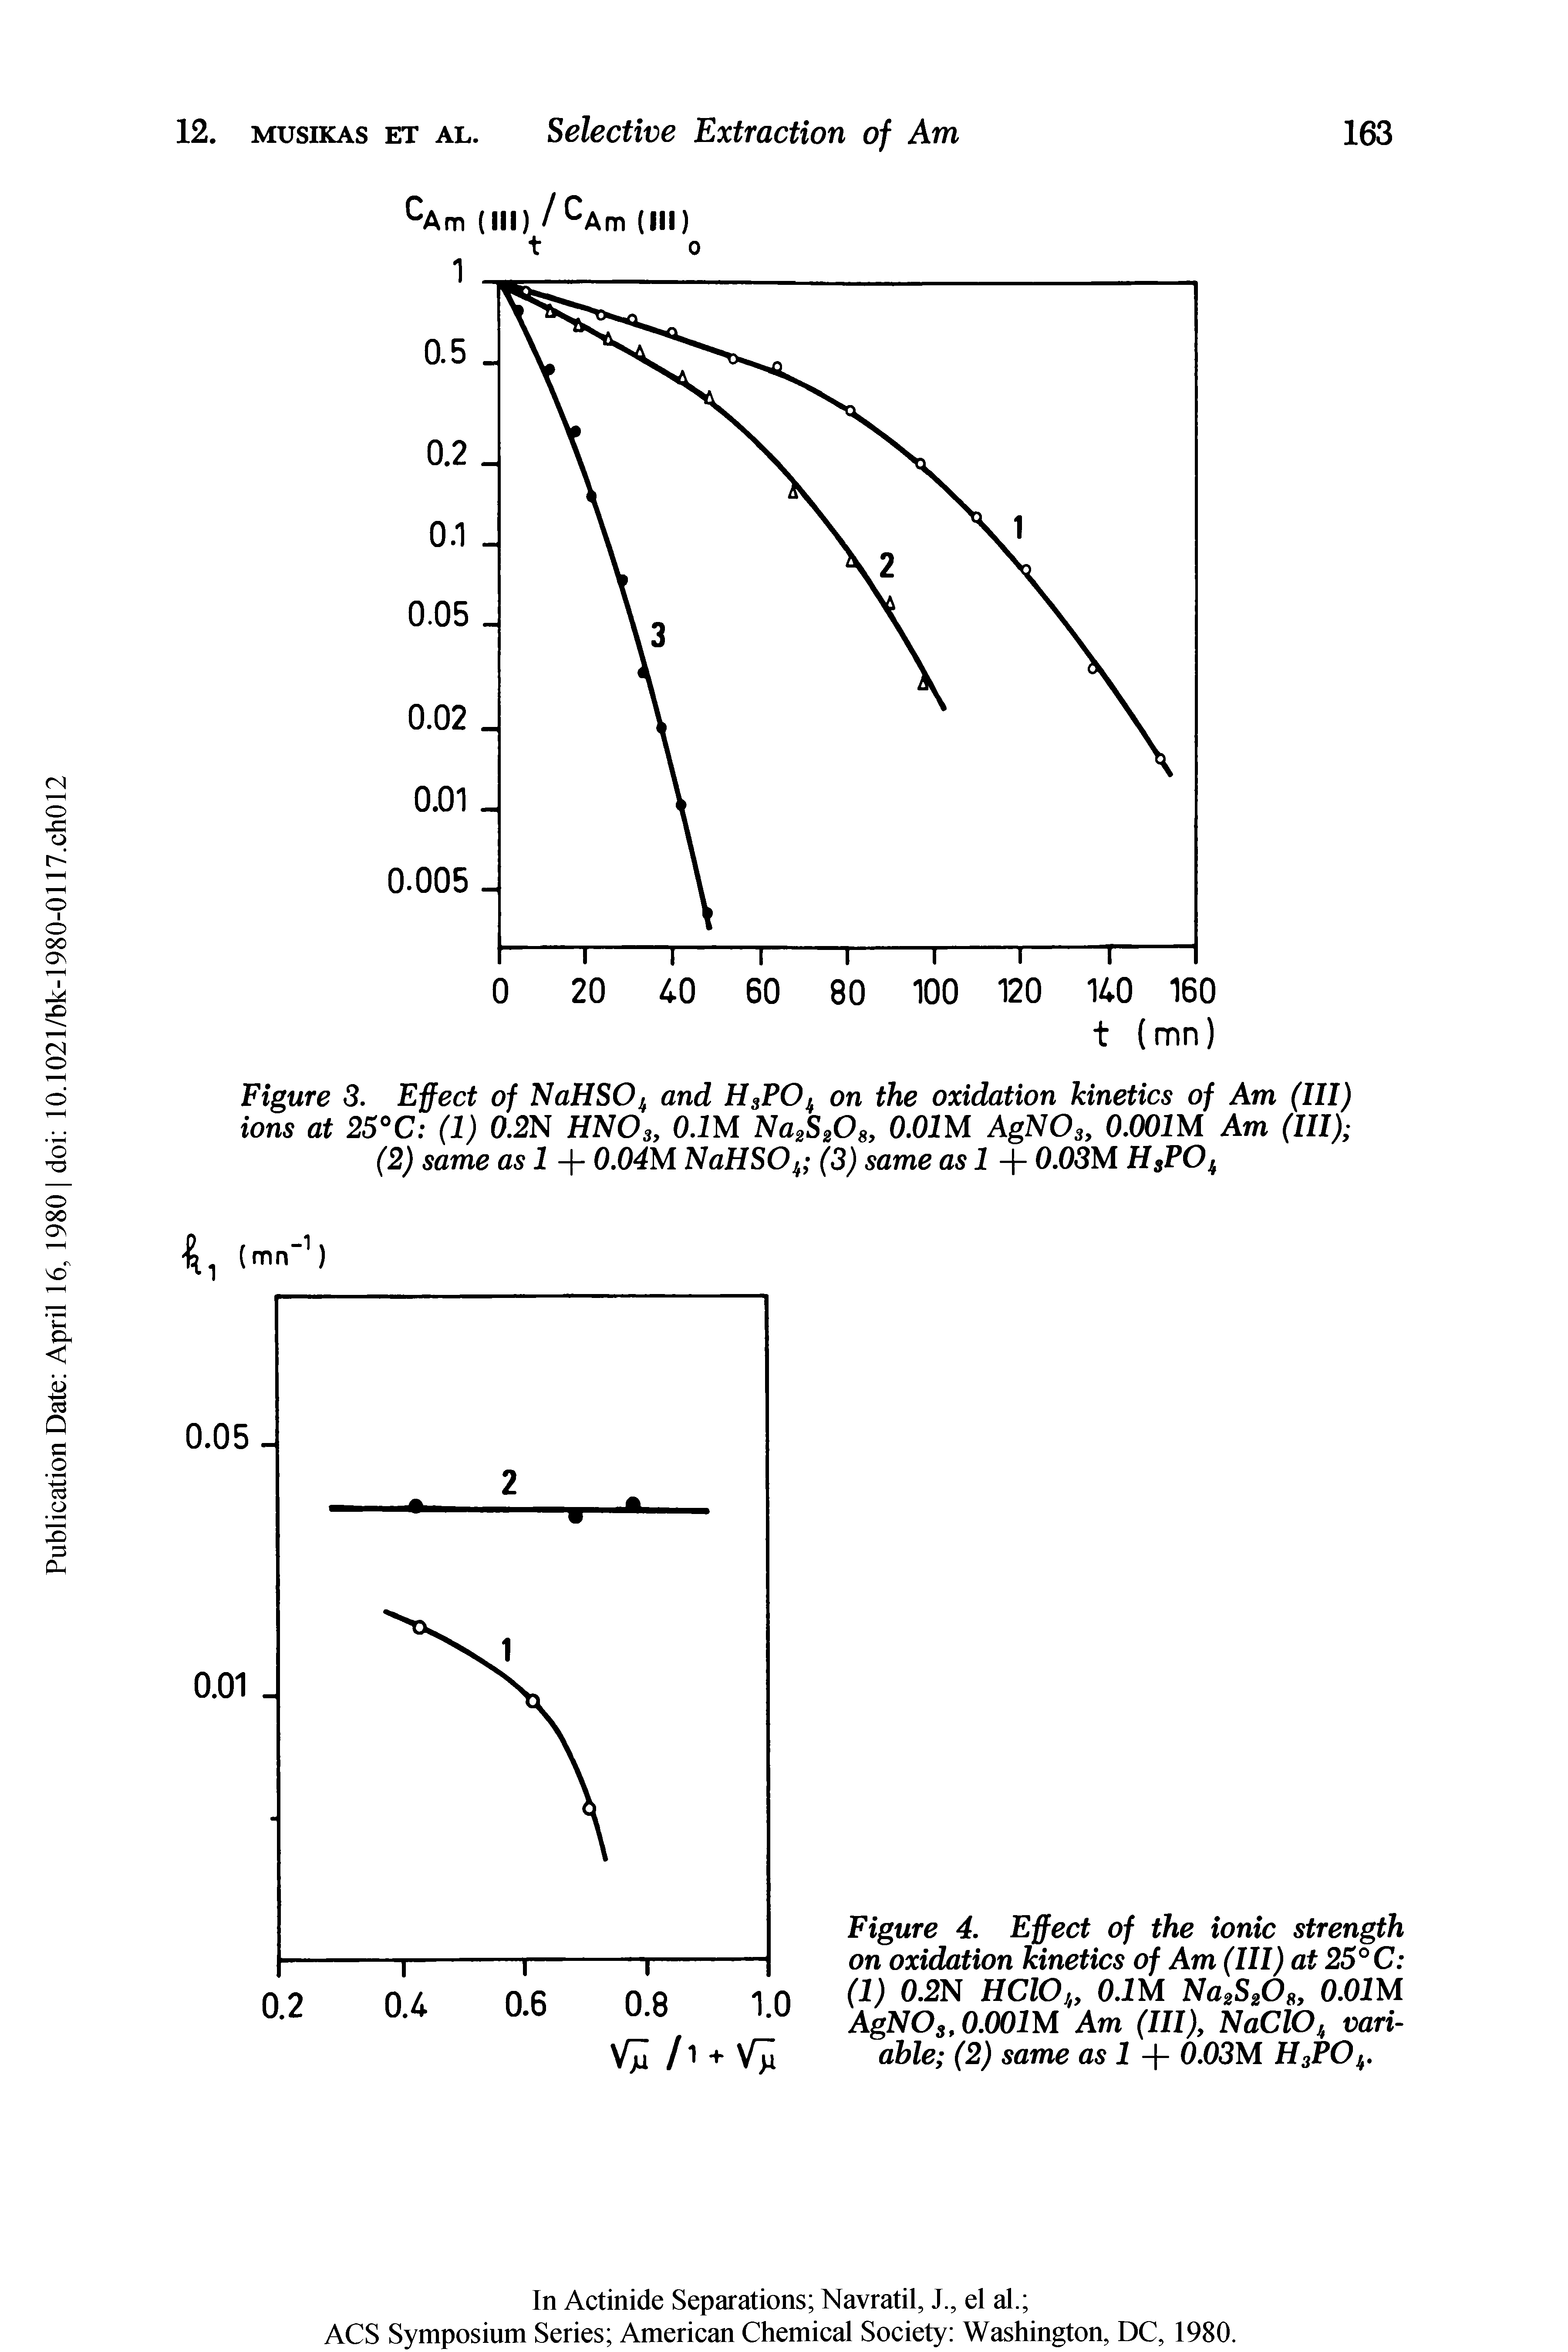 Figure 4. Effect of the ionic strength on oxidation kinetics of Am (III) at 25° C (1) 0.2N HC Oh, 0.1 M Na2S2Os, 0.0IM AgNOs,0.001M Am (III), NaClO,t variable (2) same as 1 + 0.03M H3POh.